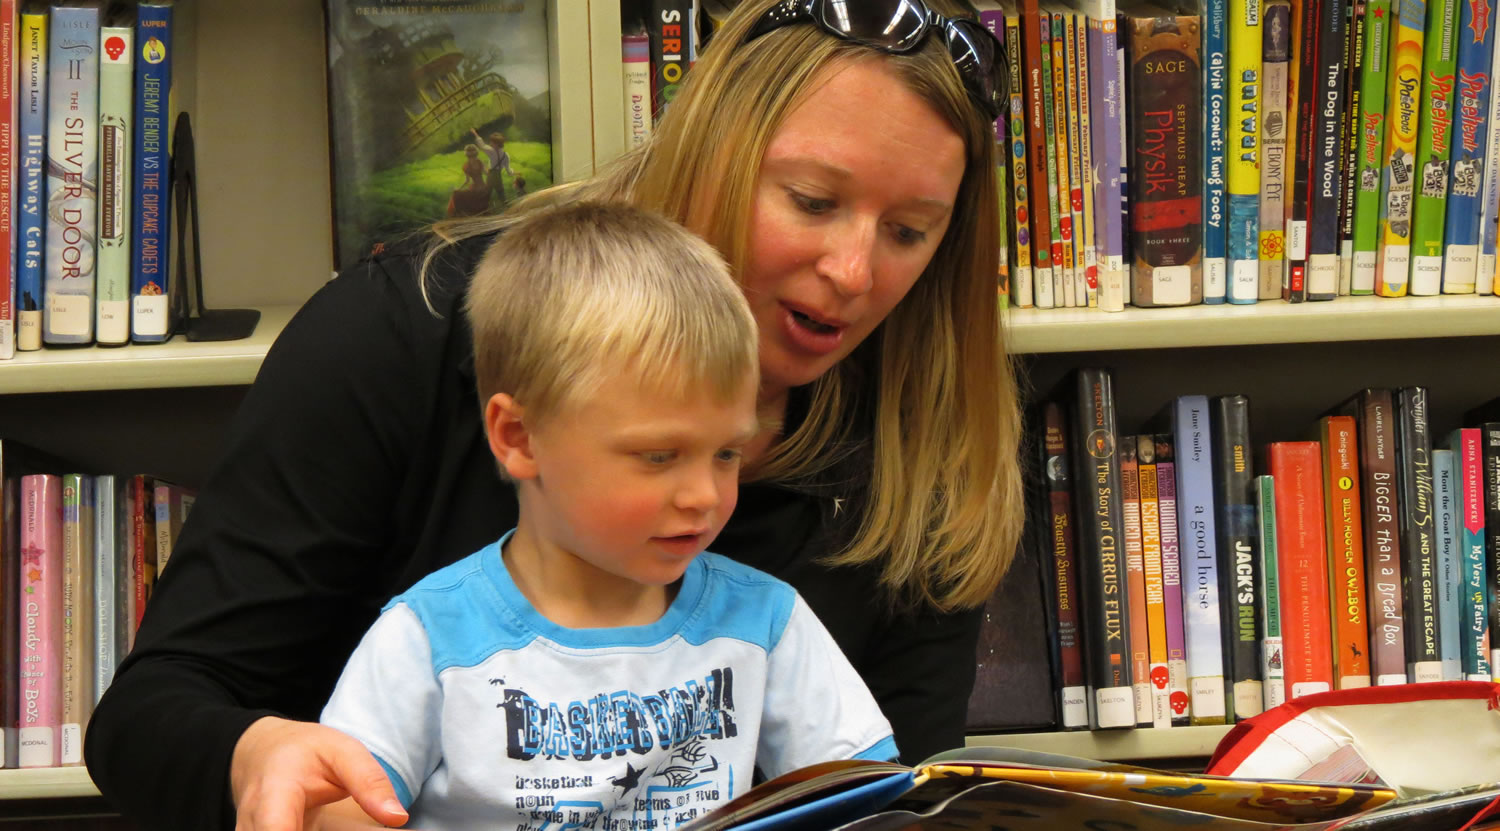 Children from birth through age 19 are welcome to participate in the Washougal Public Library's summer reading program.